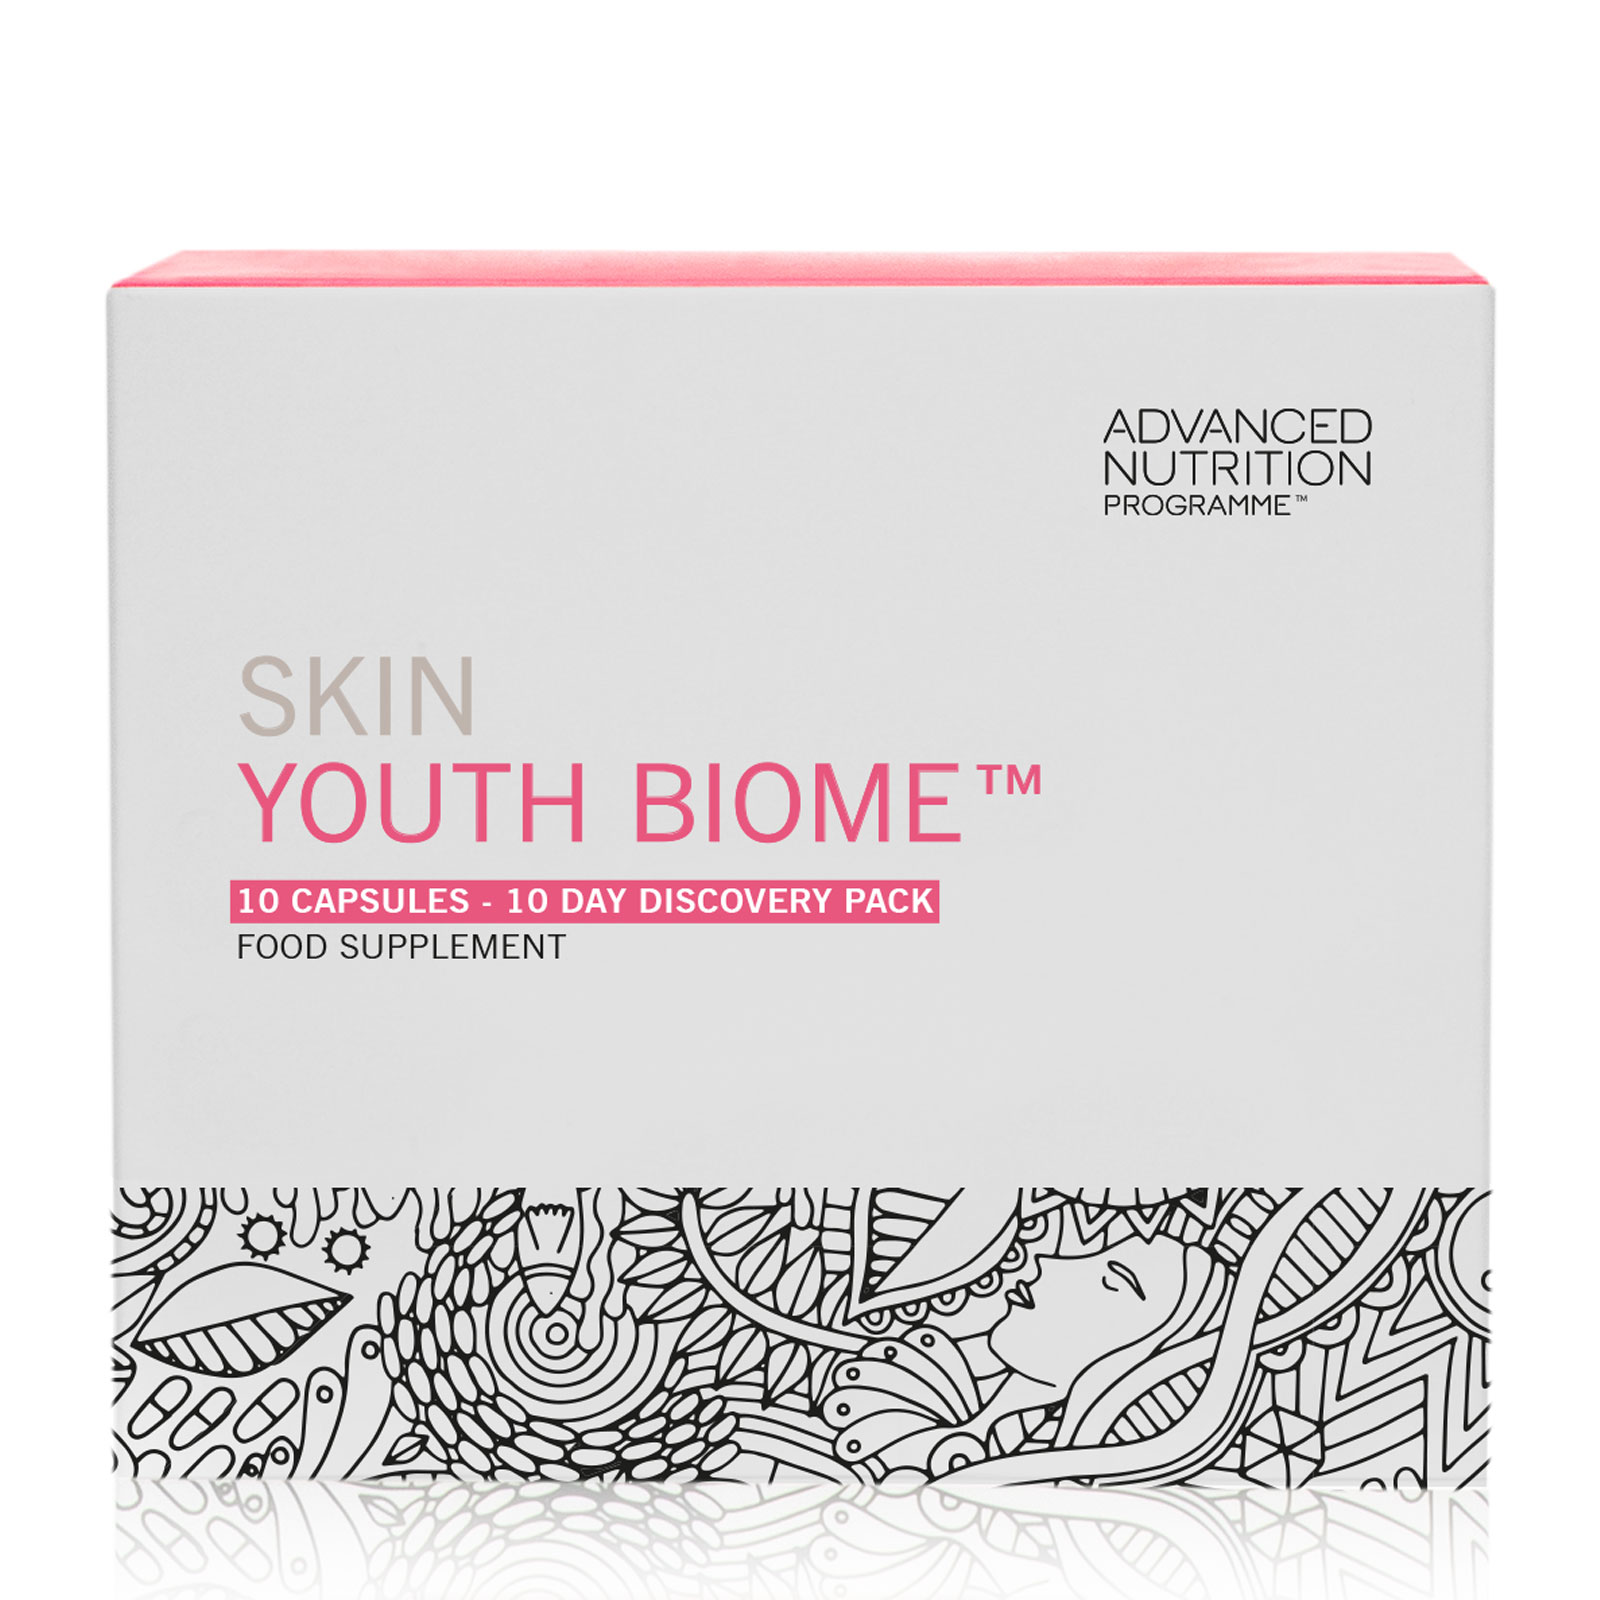 Advanced Nutrition Programme Skin Youth Biome X 10 Capsules